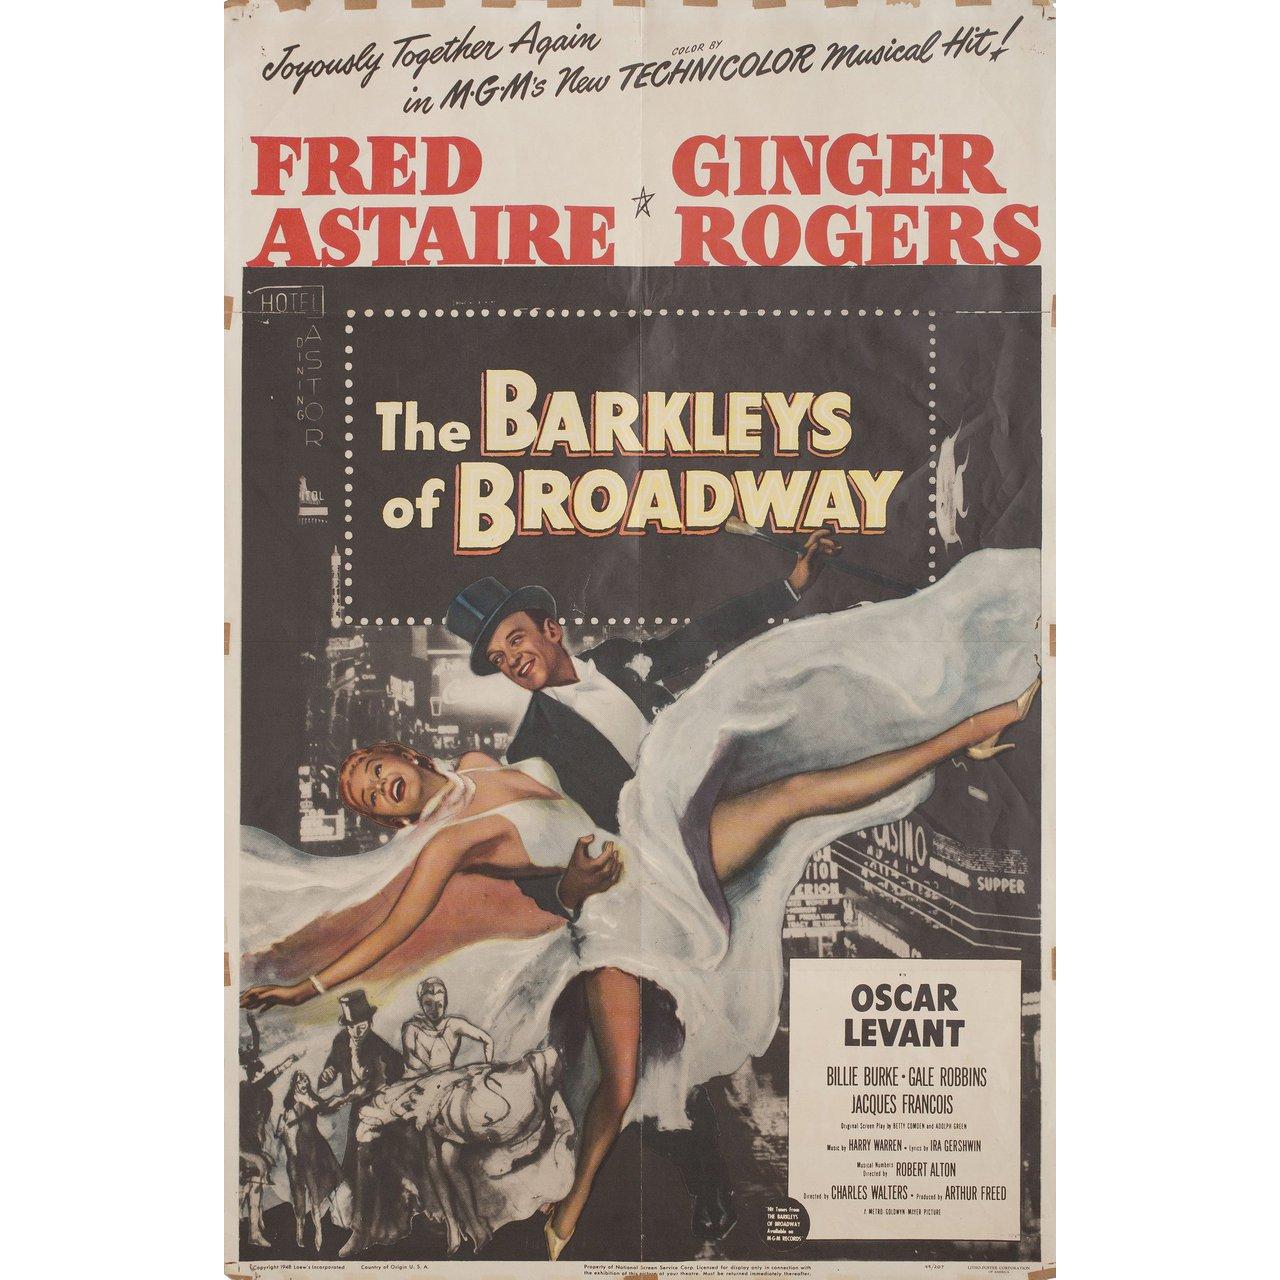 Original 1948 U.S. one sheet poster for the film The Barkleys of Broadway directed by Charles Walters with Fred Astaire / Ginger Rogers / Oscar Levant / Billie Burke. Good-Very Good condition, folded with tape. Many original posters were issued